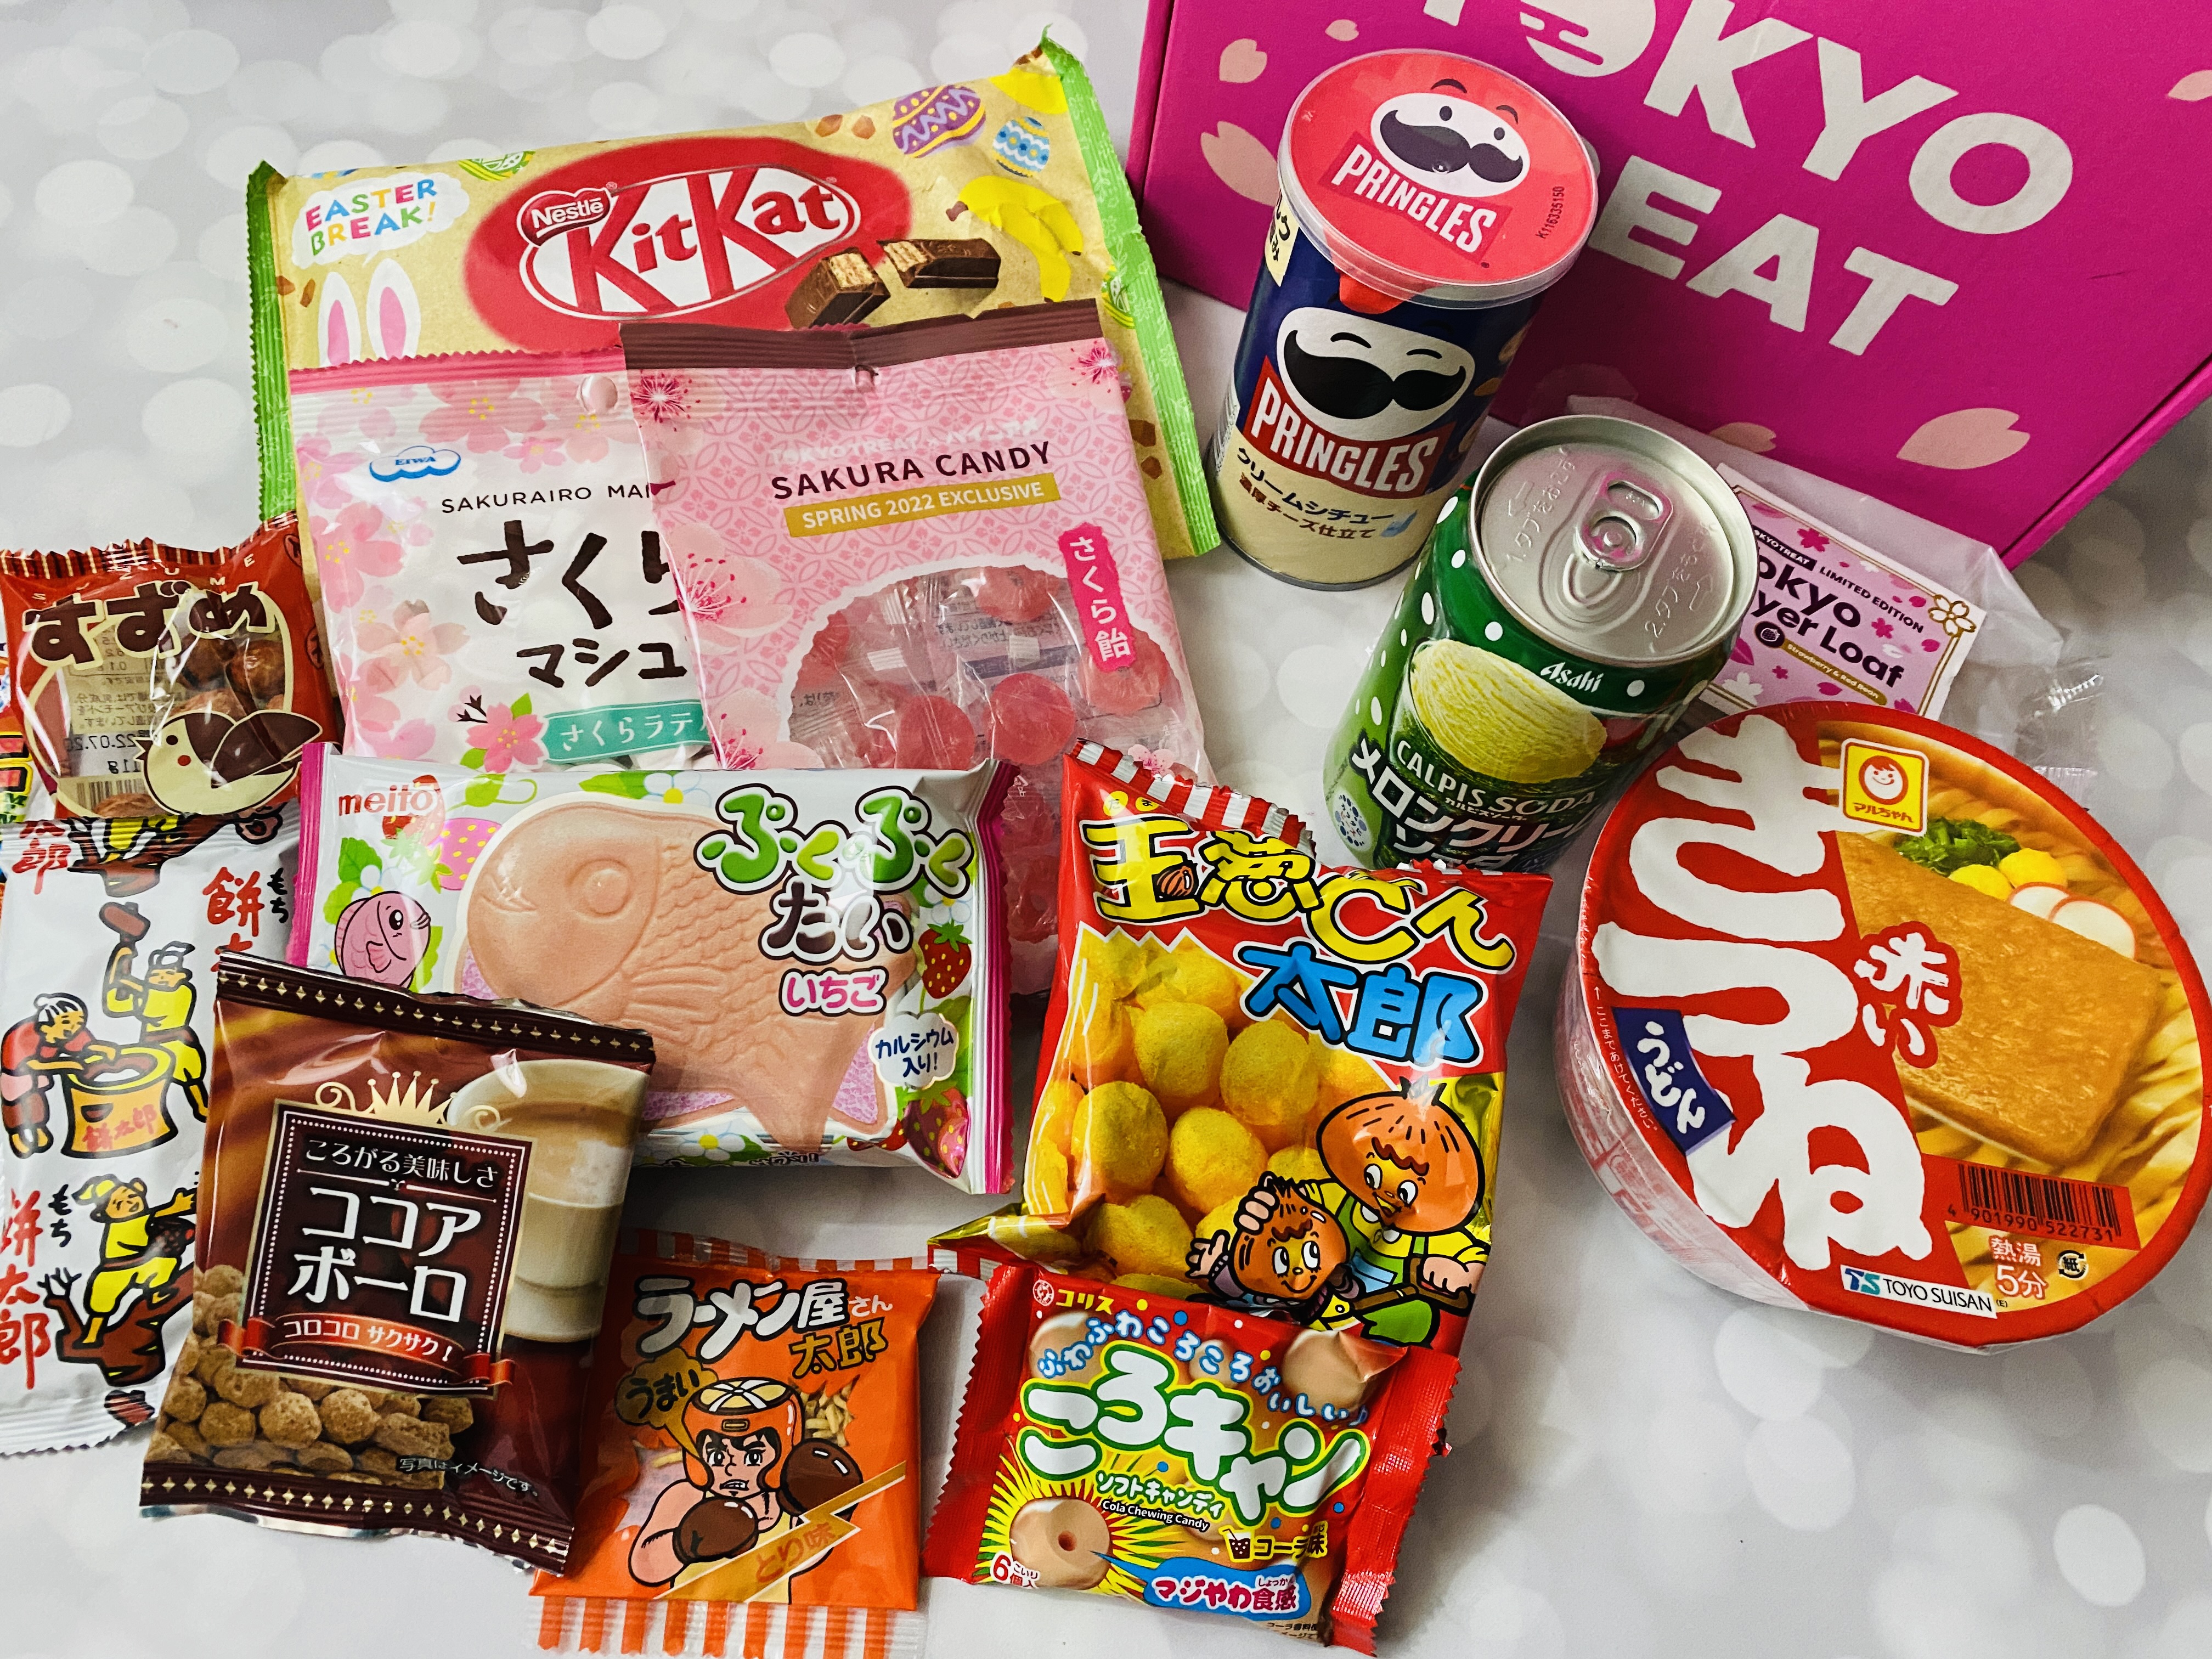 Tokyo Treat Review: Candy & Snacks From Japan